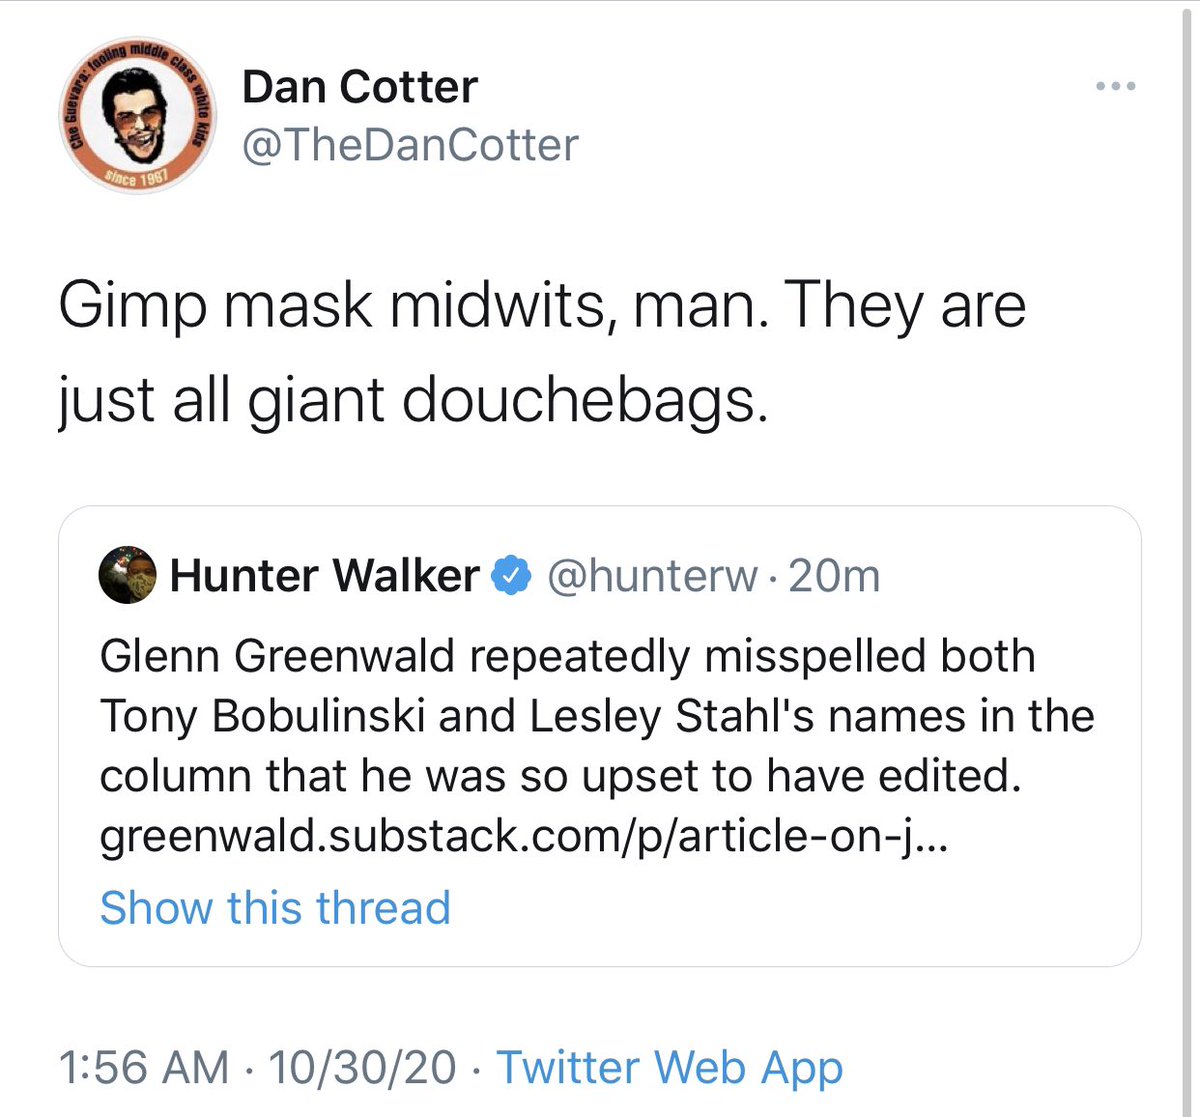 We've reached the "making fun of me for wearing a mask during a pandemic" stage of this debate. Clearly an intelligent, substantive defense of Glenn's work here.